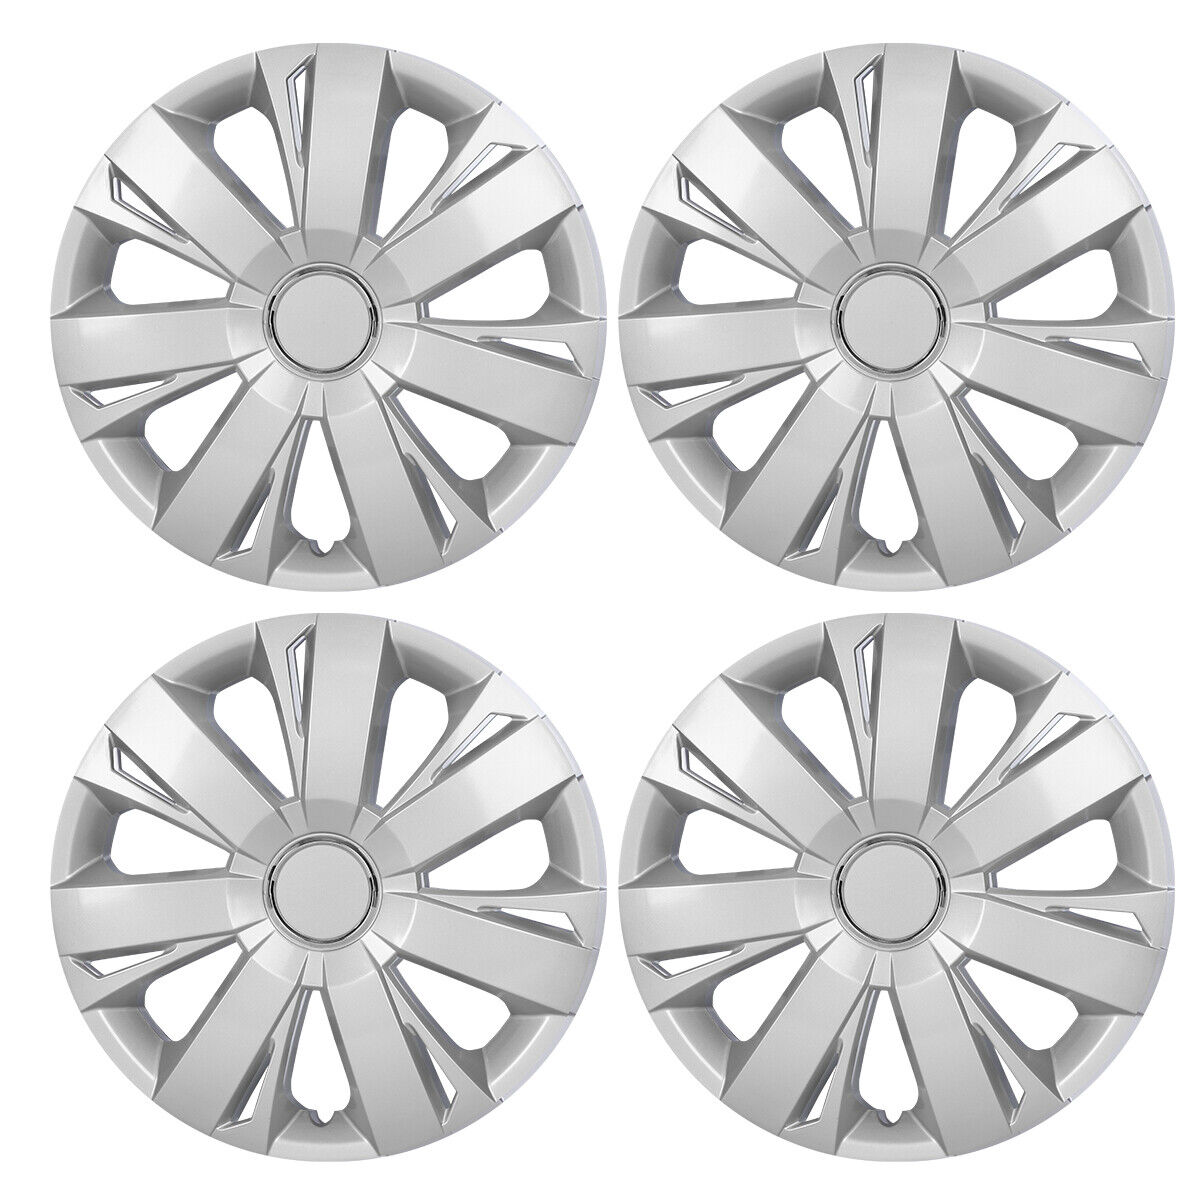 16 Inch Wheel Covers Full Rim Snap On Hub Caps for R16 Auto Tire & Steel 4pcs